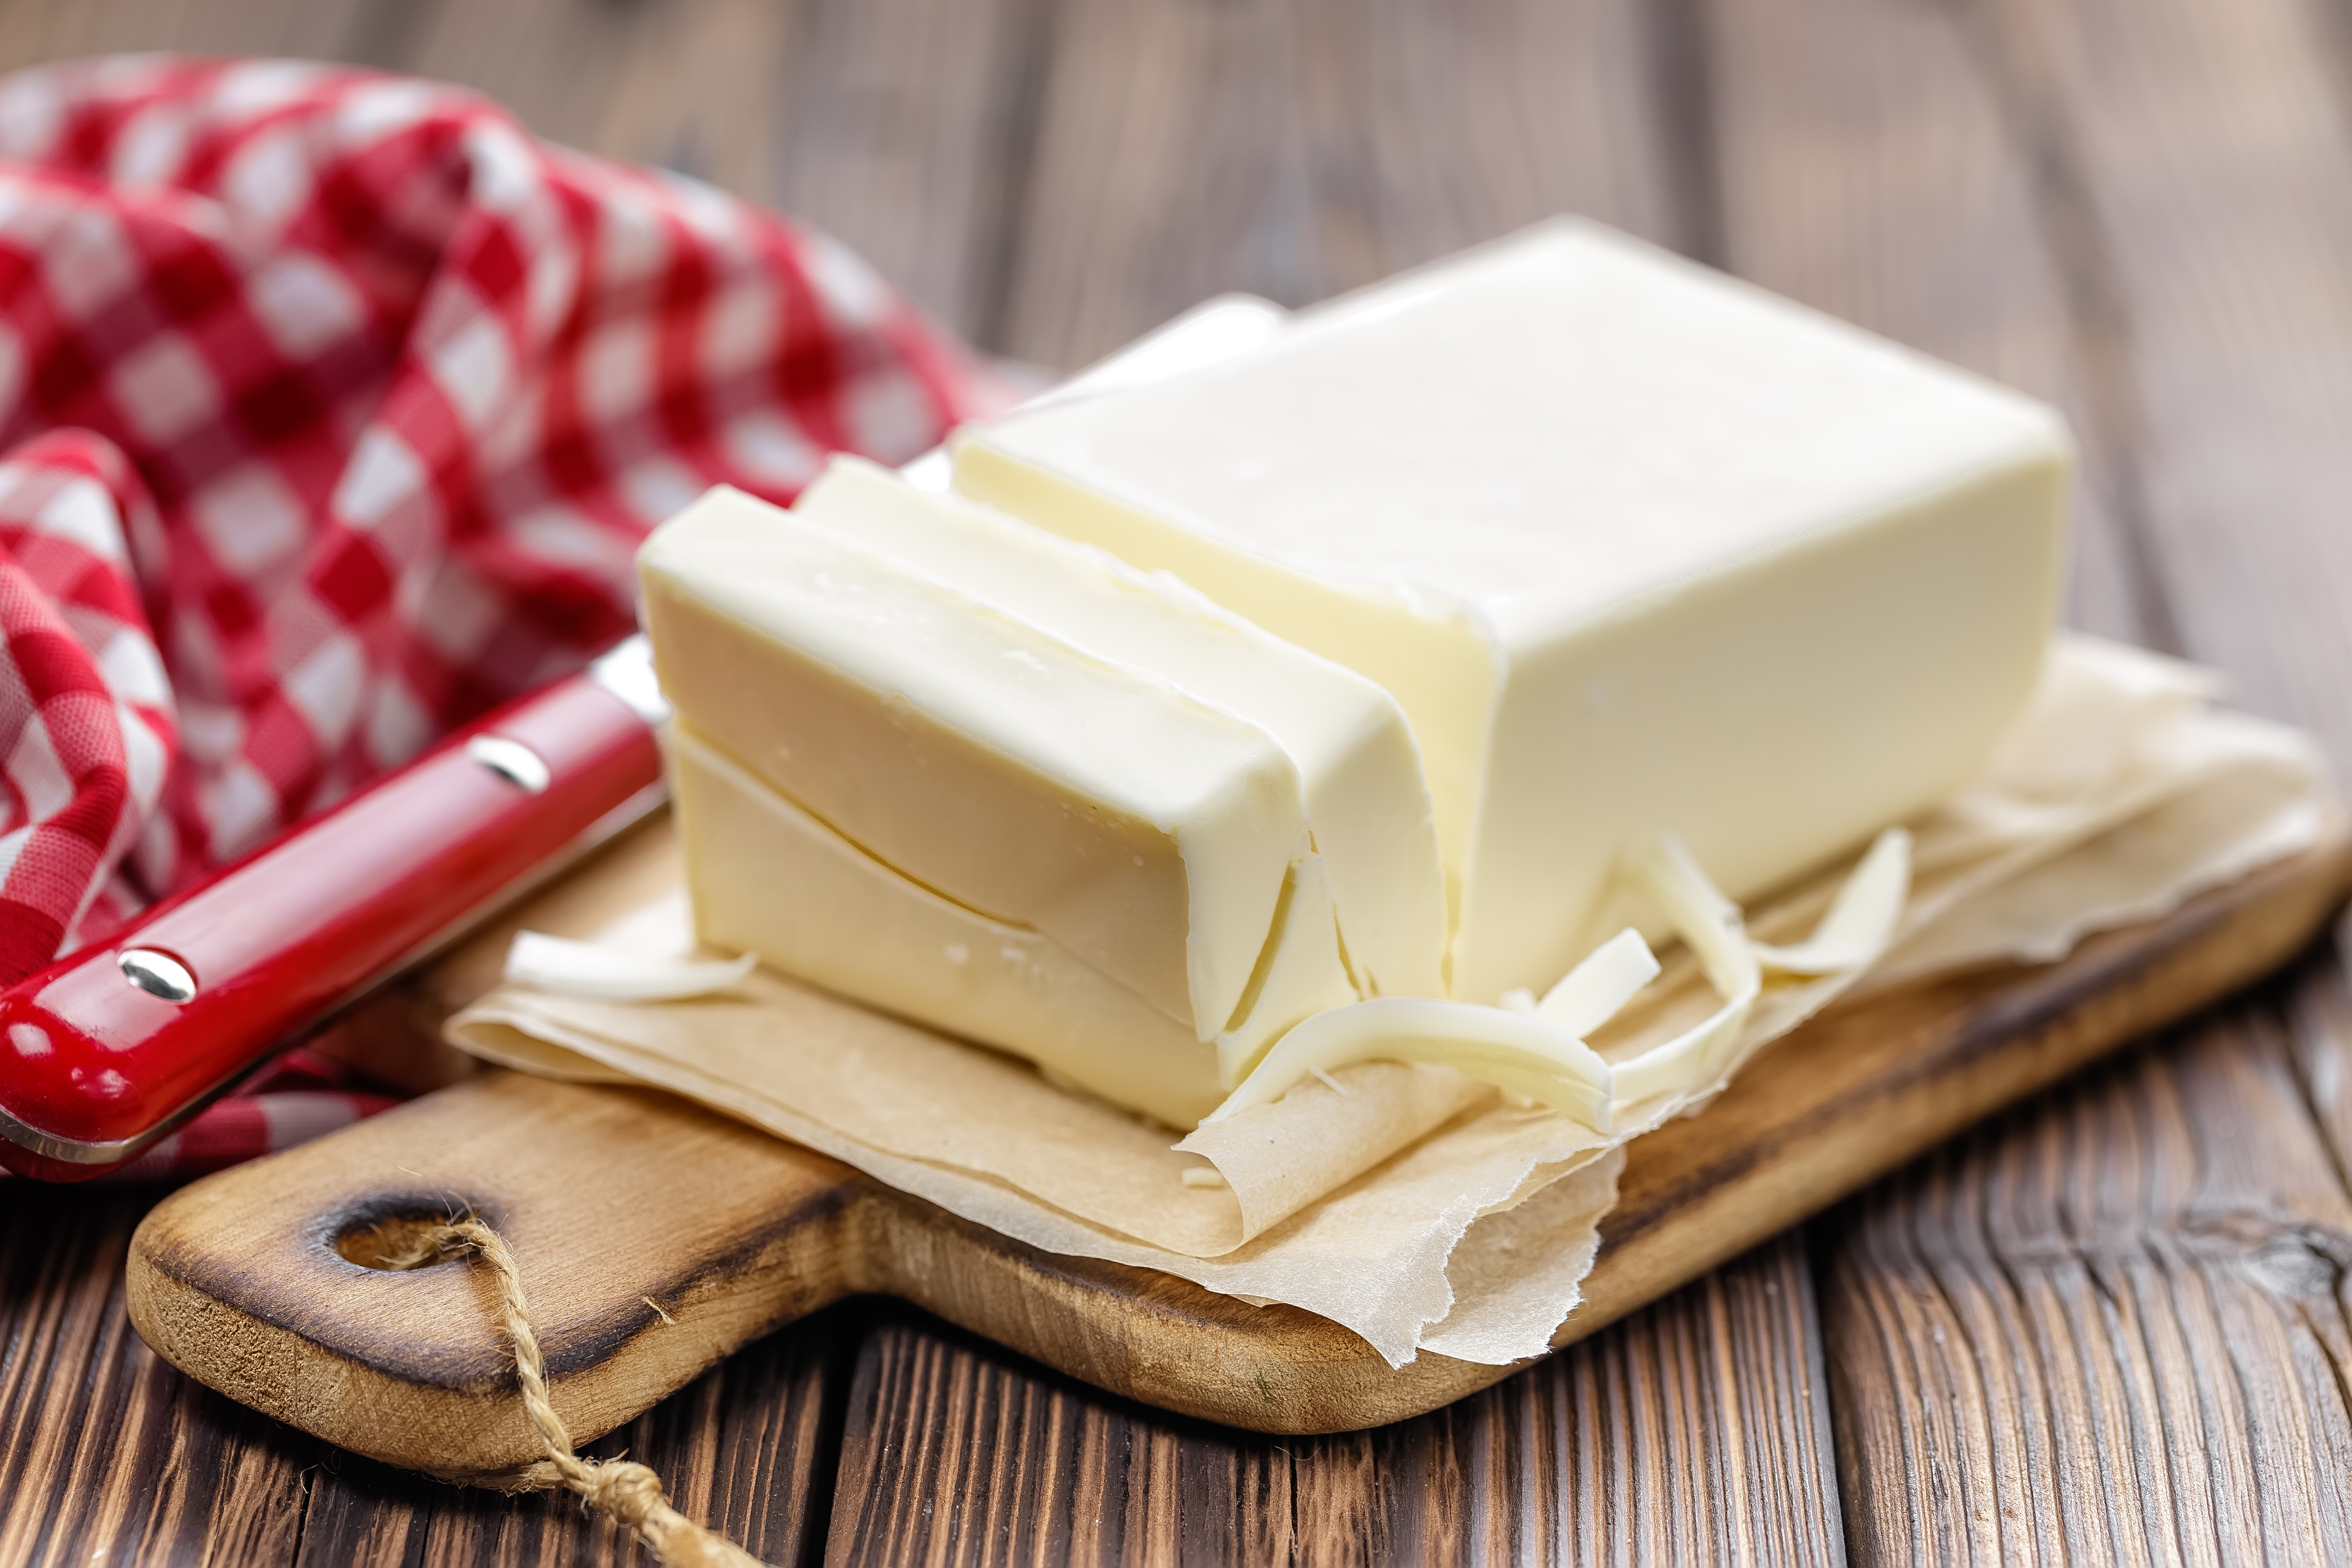 Tips for cooking with butter